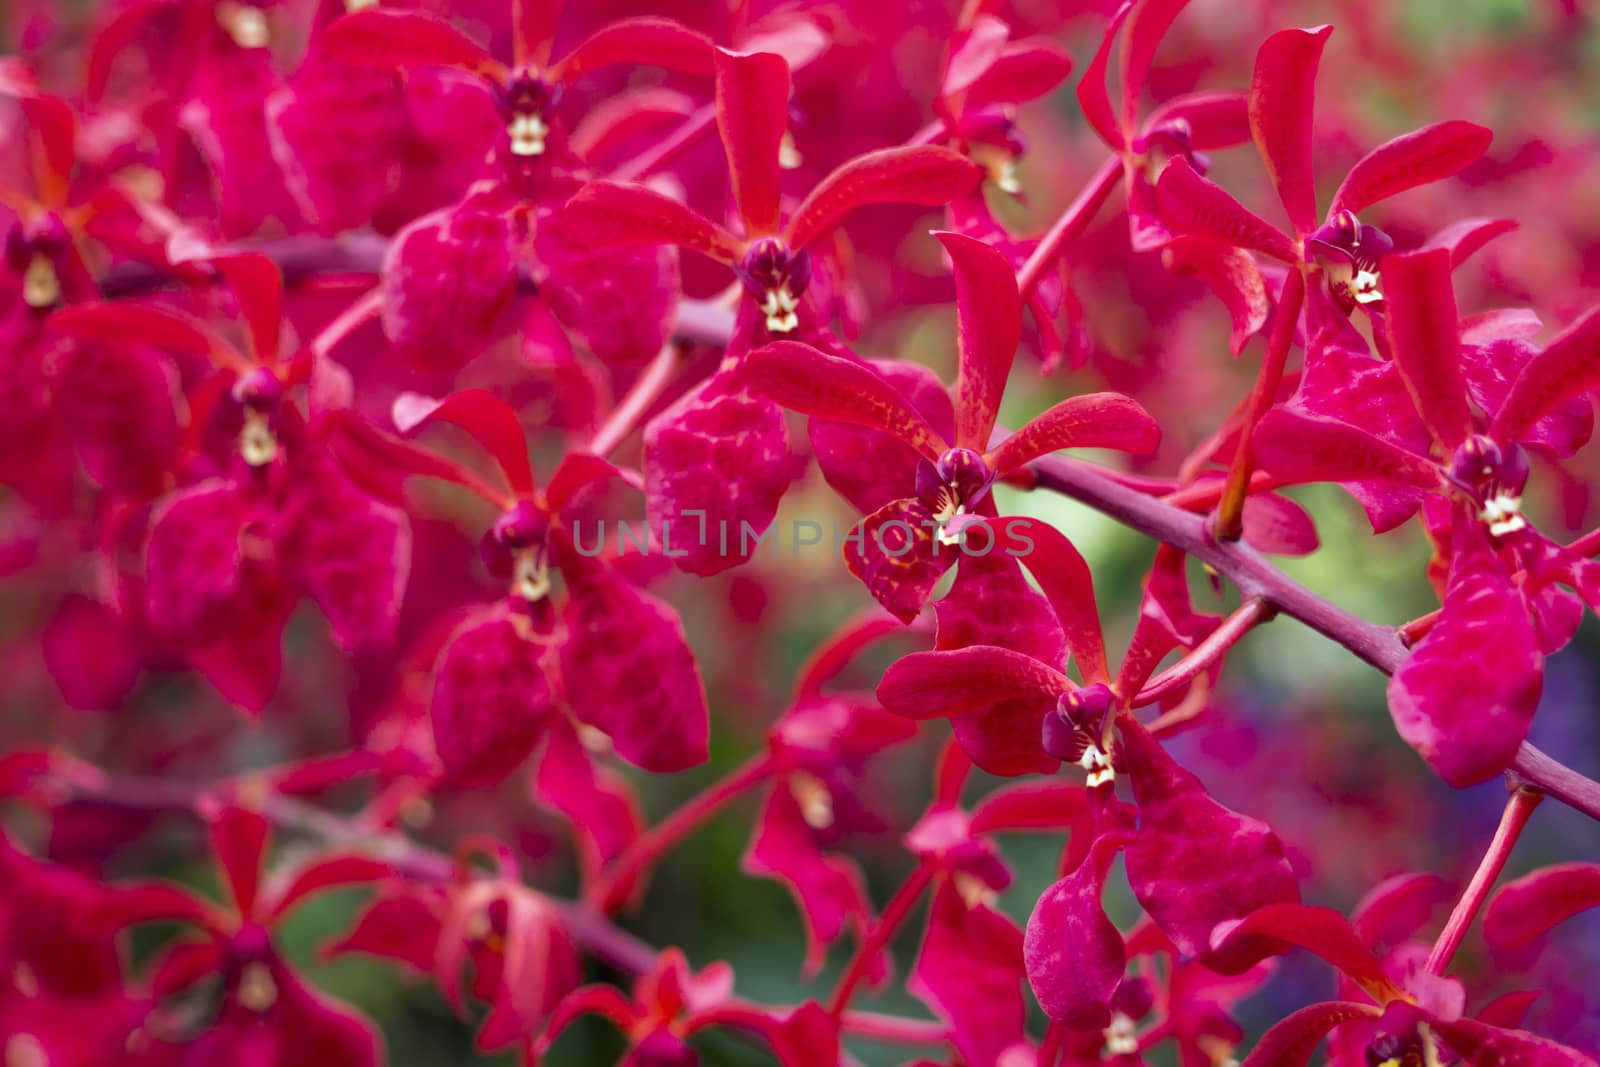 bright red orchids from National Orchid Garden of Singapore; focus on front central flowers